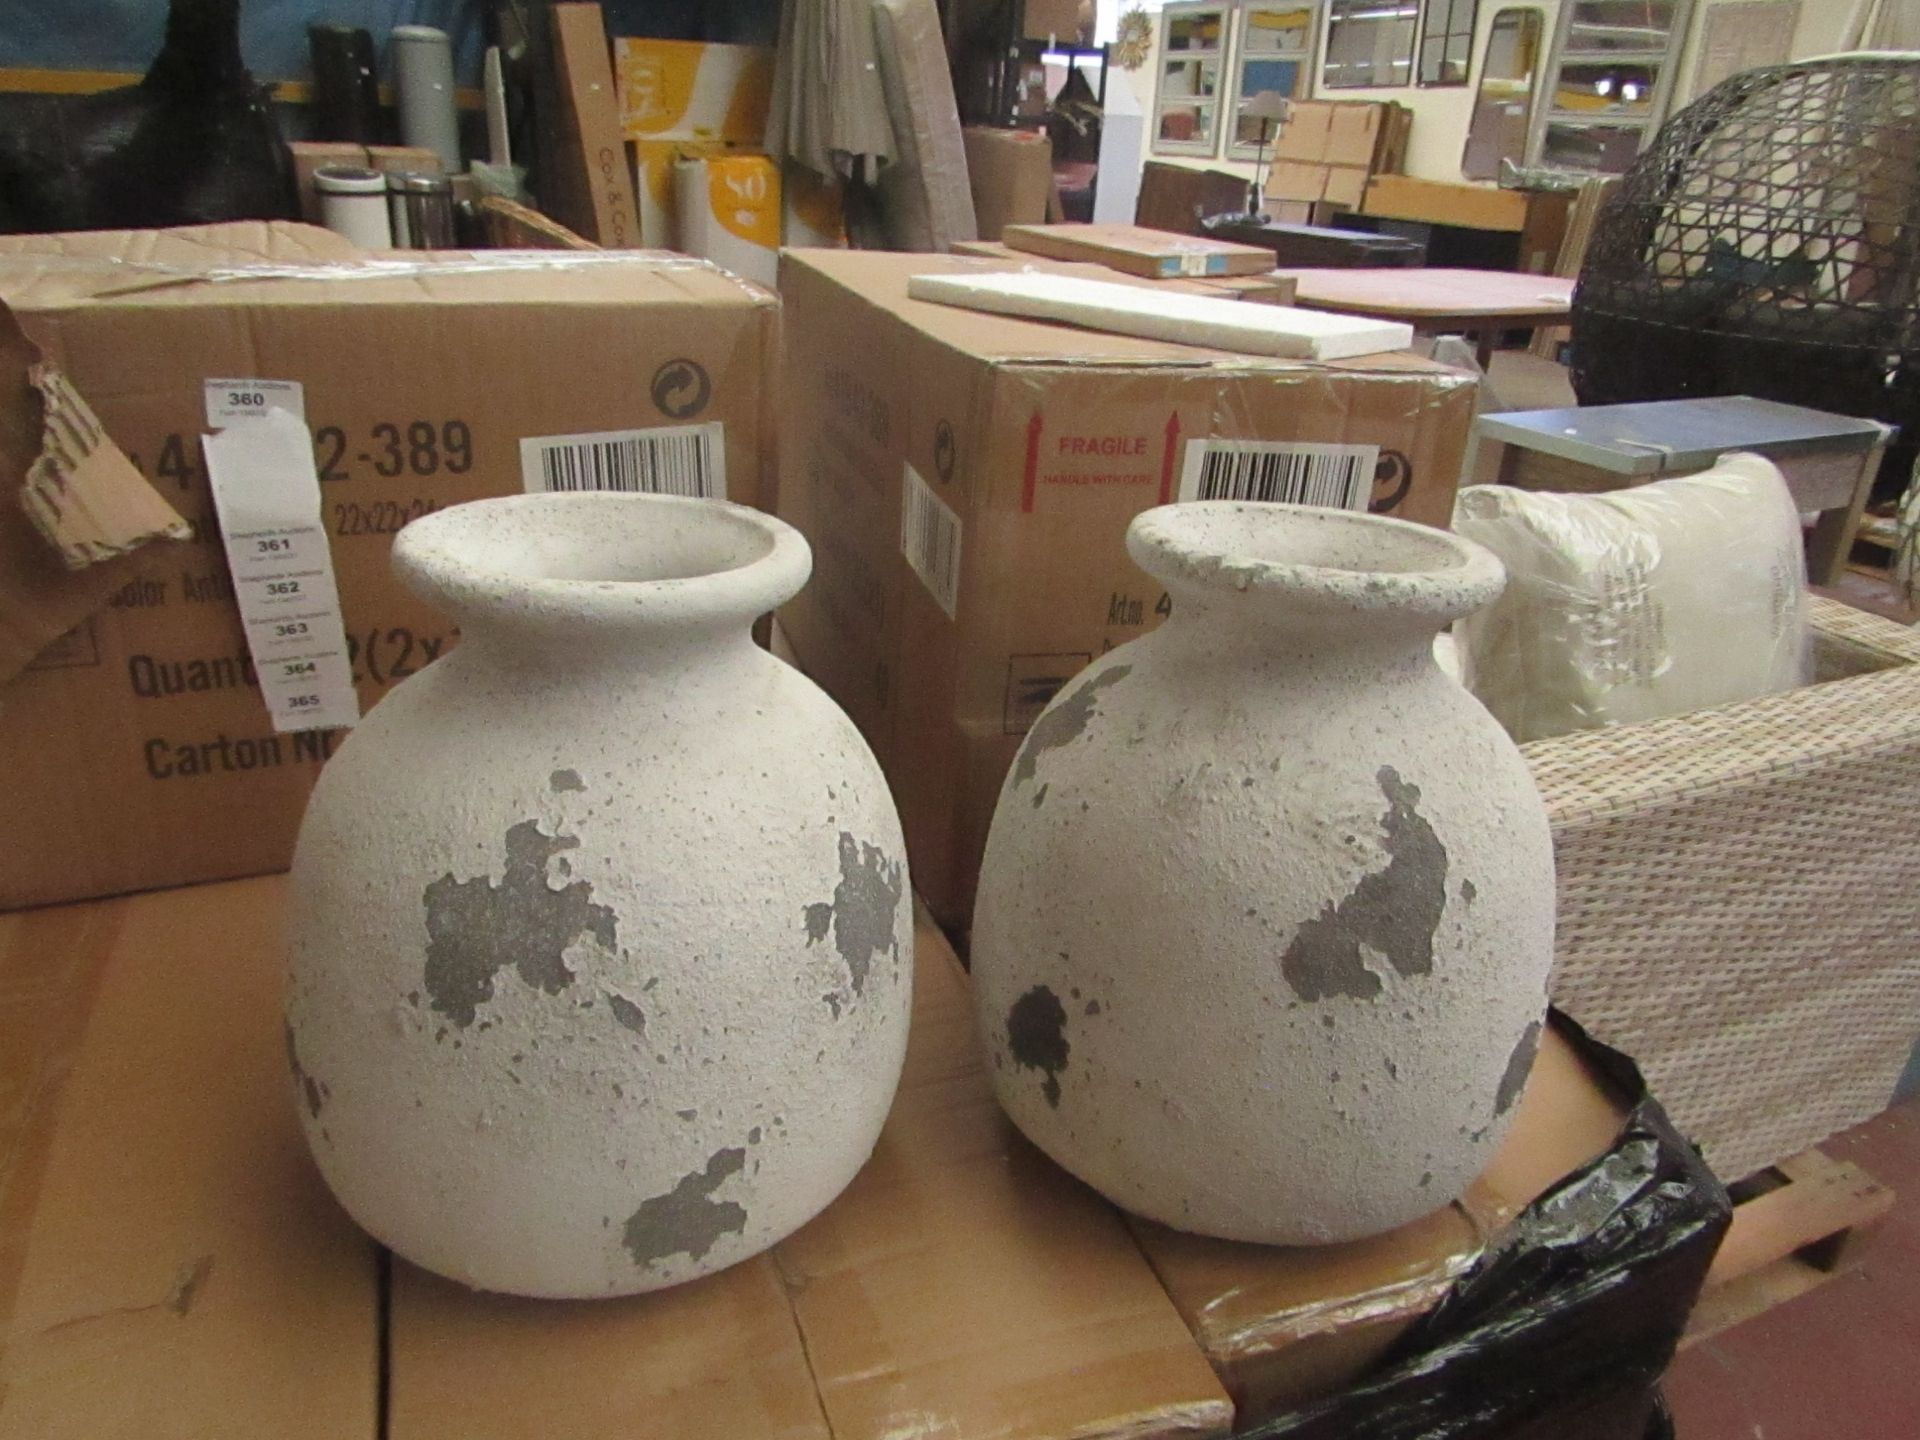 | 2X | COX AND COX ANTIQYUE GREY BOTTLE CEMENT VASES | NEW AND BOXED | RRP £- |